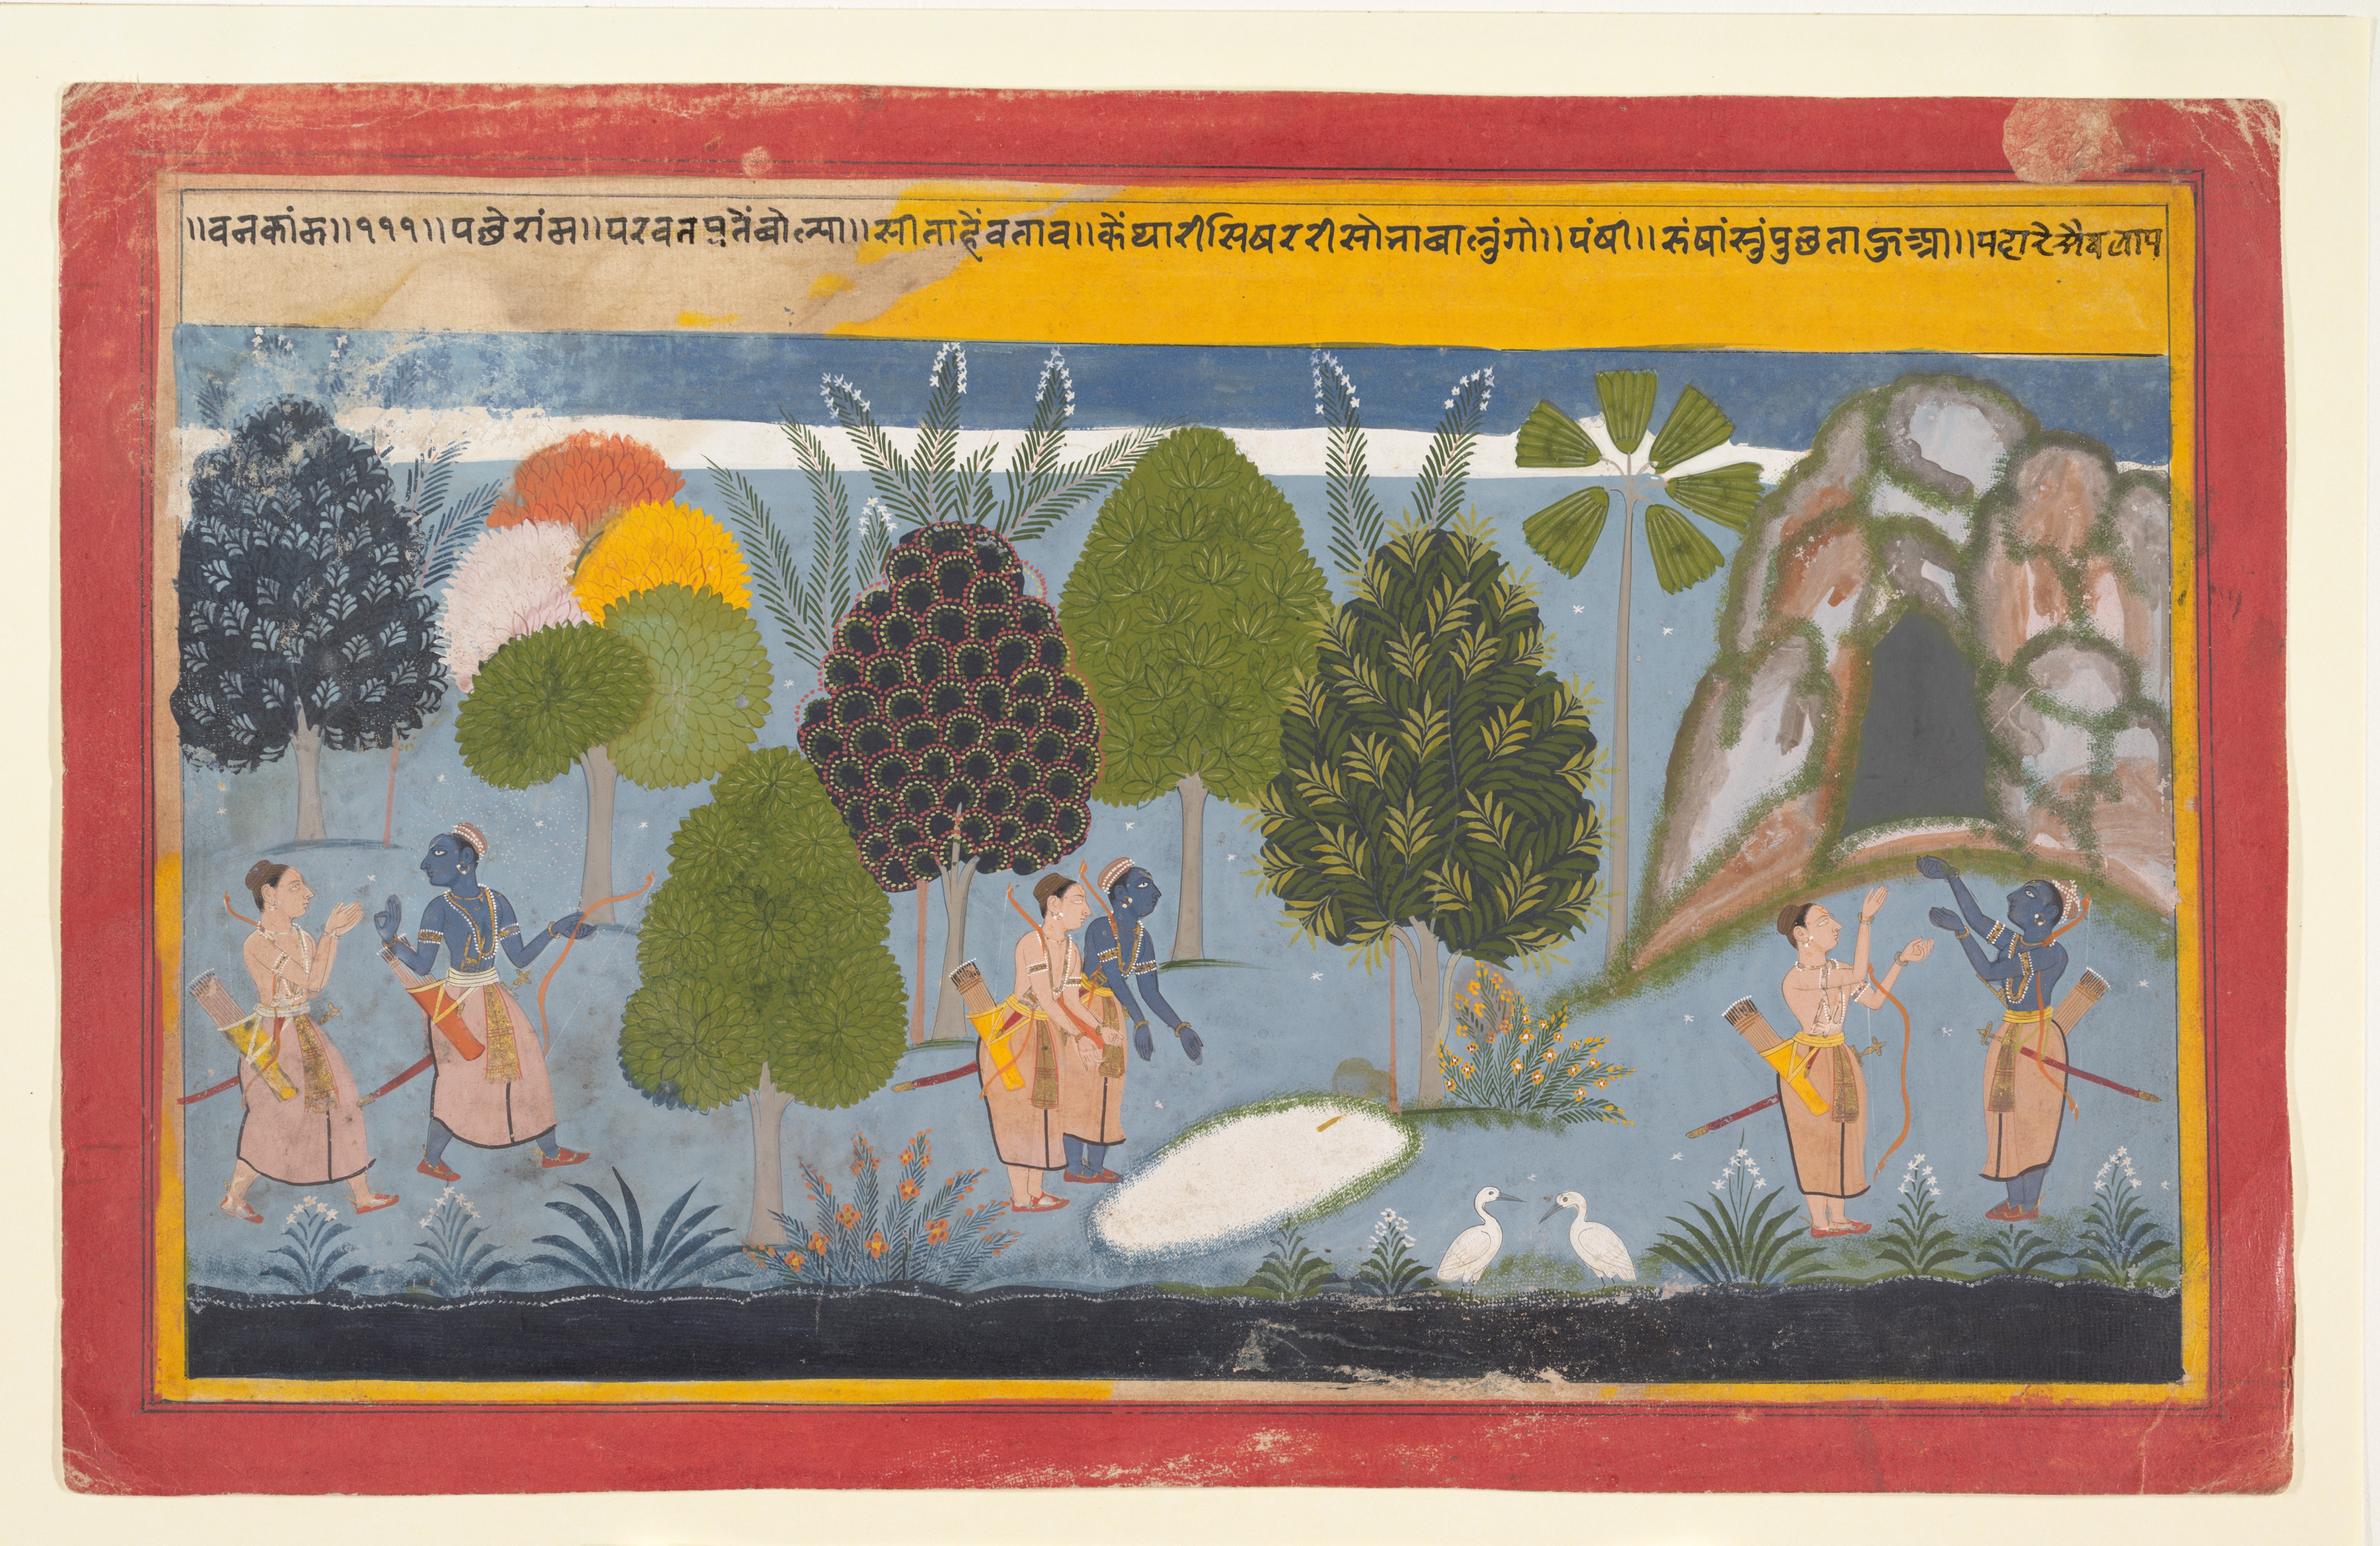 Rama and Lakshmana Search in Vain for Sita by Unknown Artist - ca. 1680 - 1690 Metropolitan Museum of Art